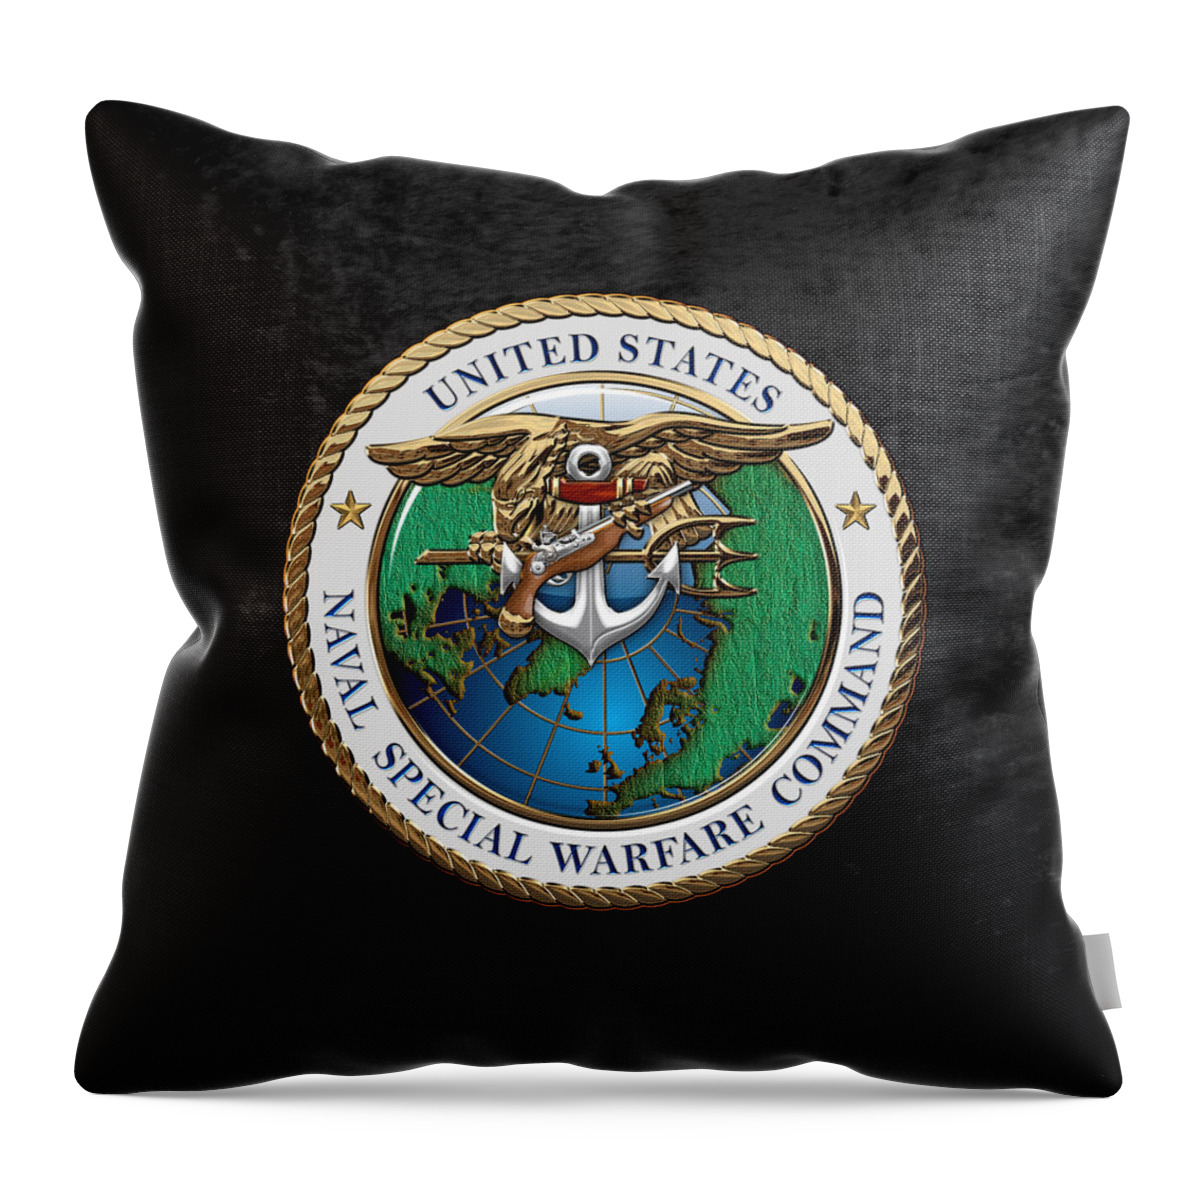 'military Insignia & Heraldry - Nswc' Collection By Serge Averbukh Throw Pillow featuring the digital art Naval Special Warfare Command - N S W C - Emblem over Black Velvet by Serge Averbukh